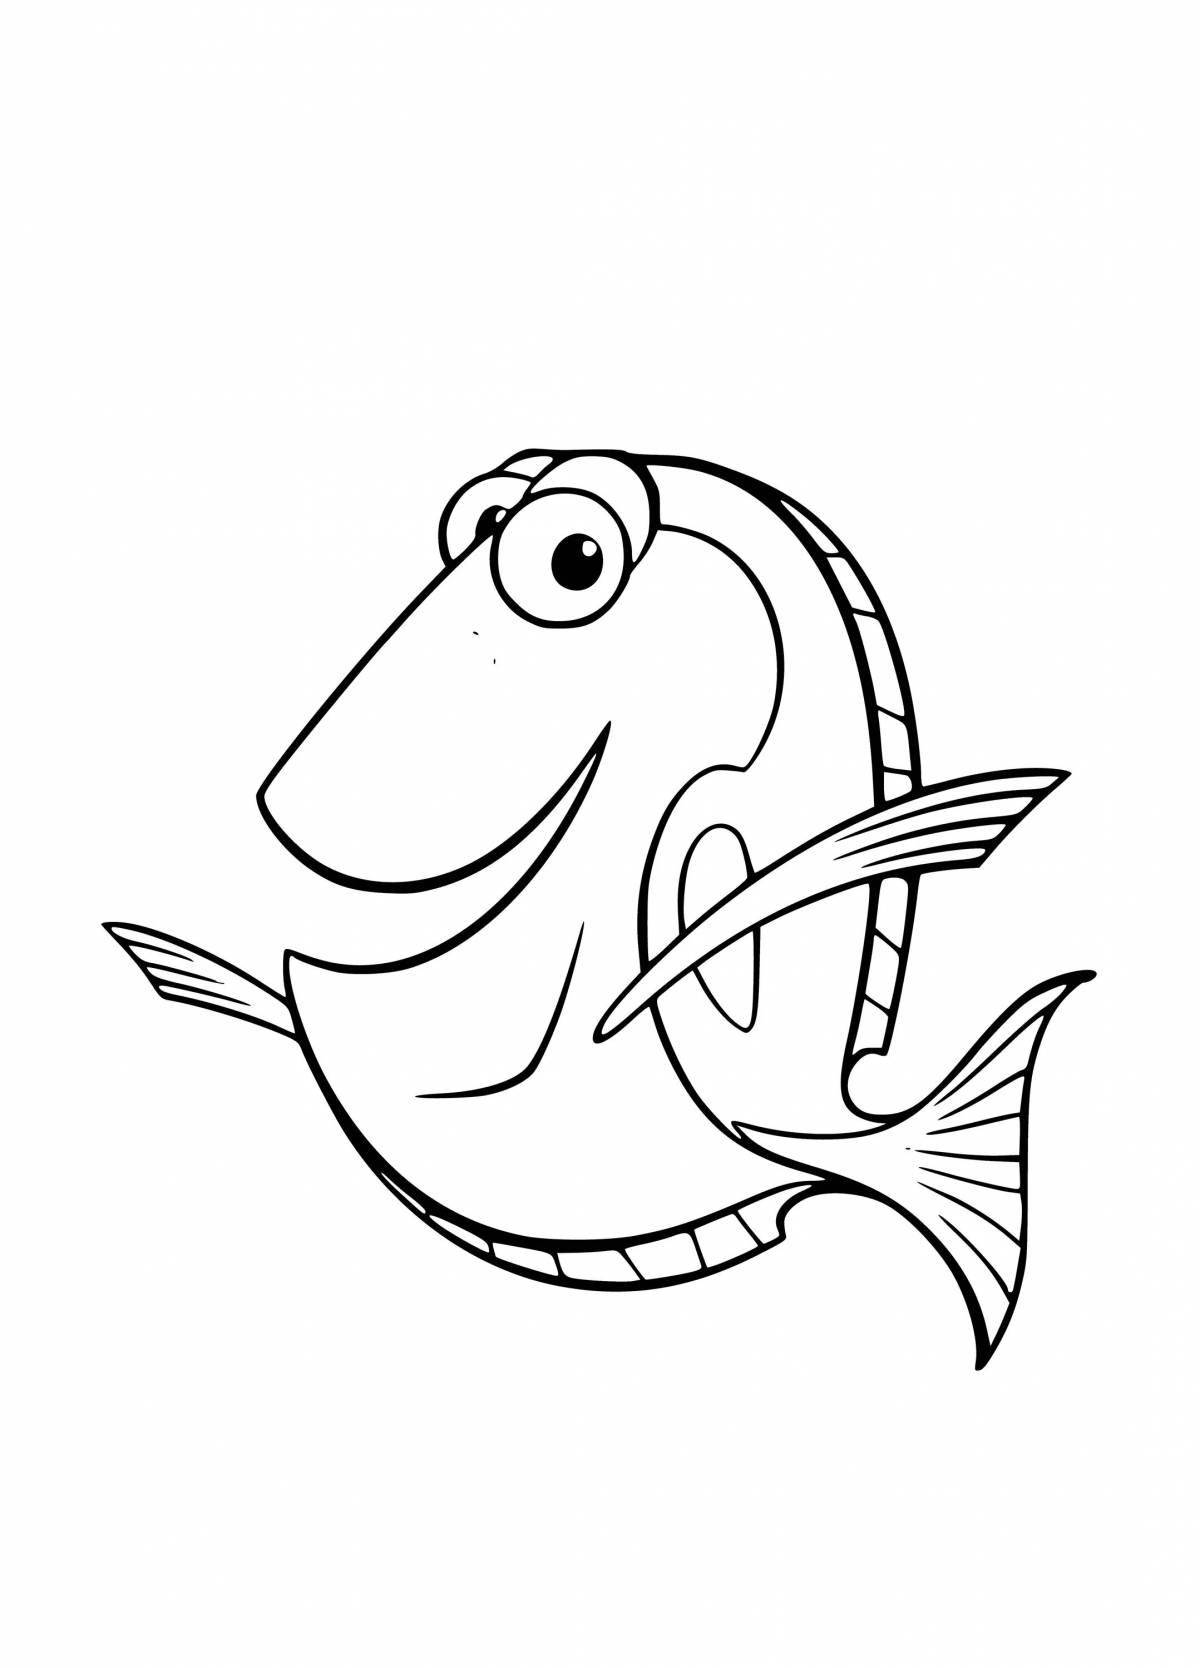 Charming nemo and dory coloring book